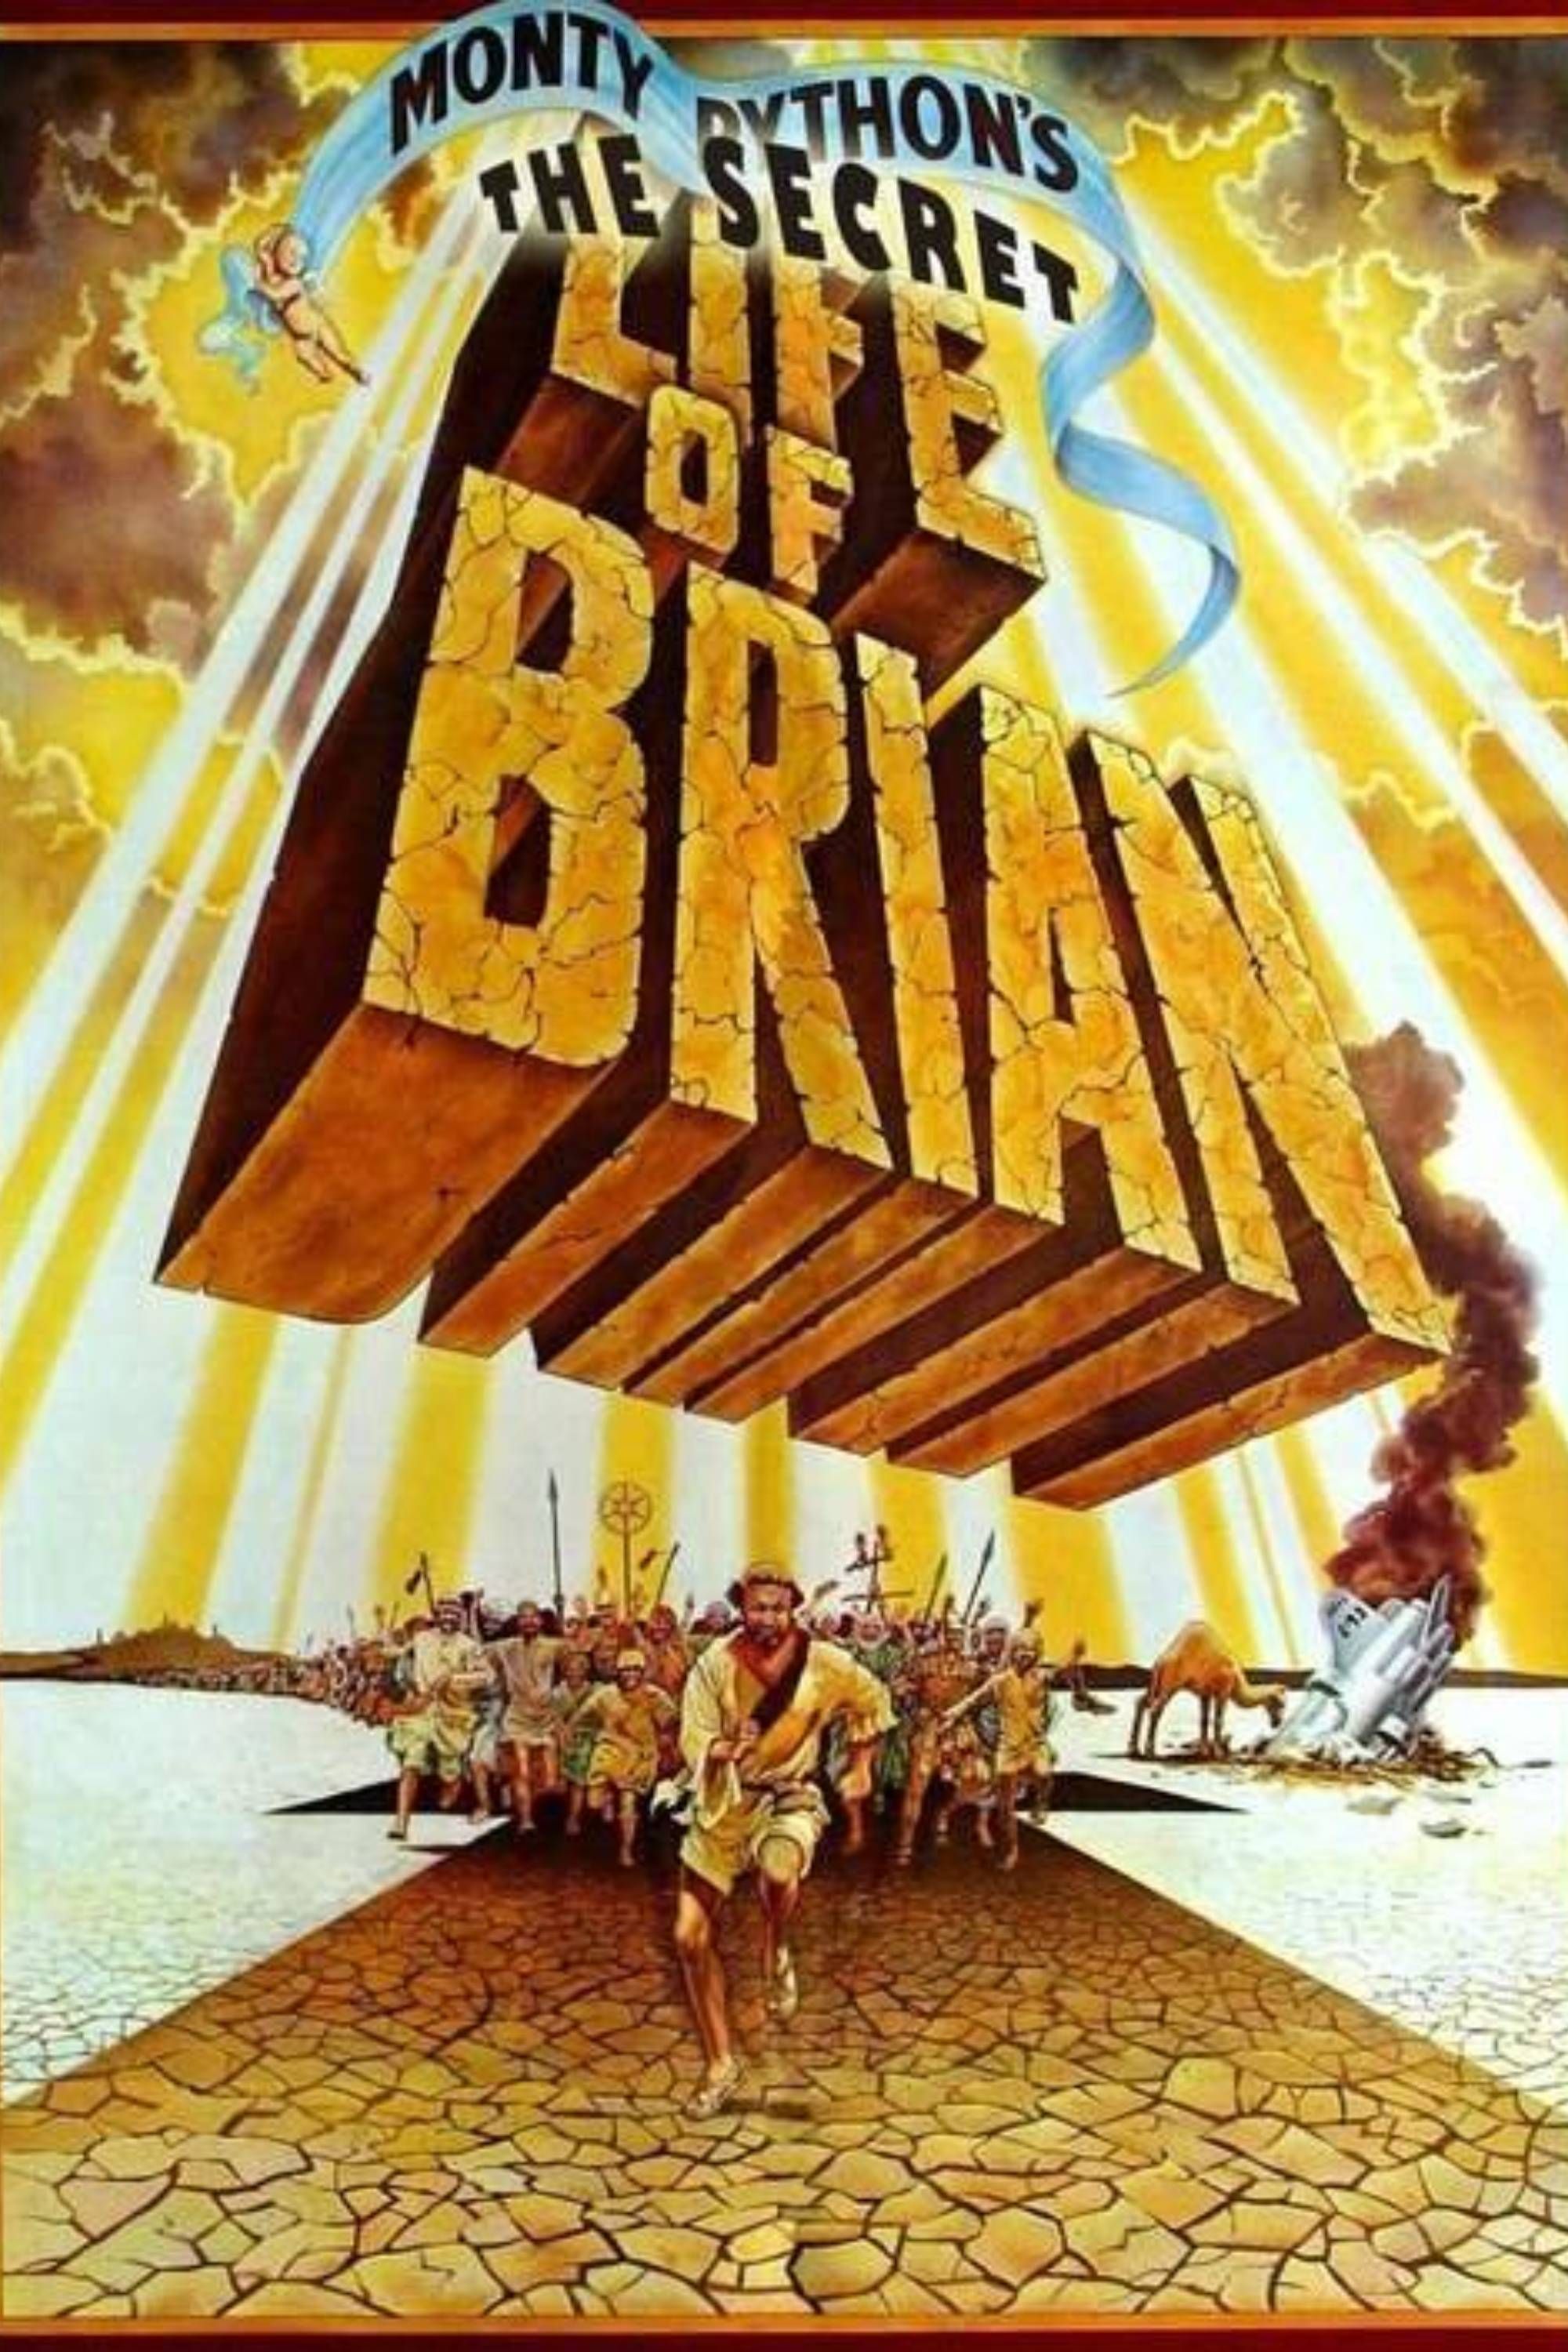 Monty Python's Life of Brian - Poster